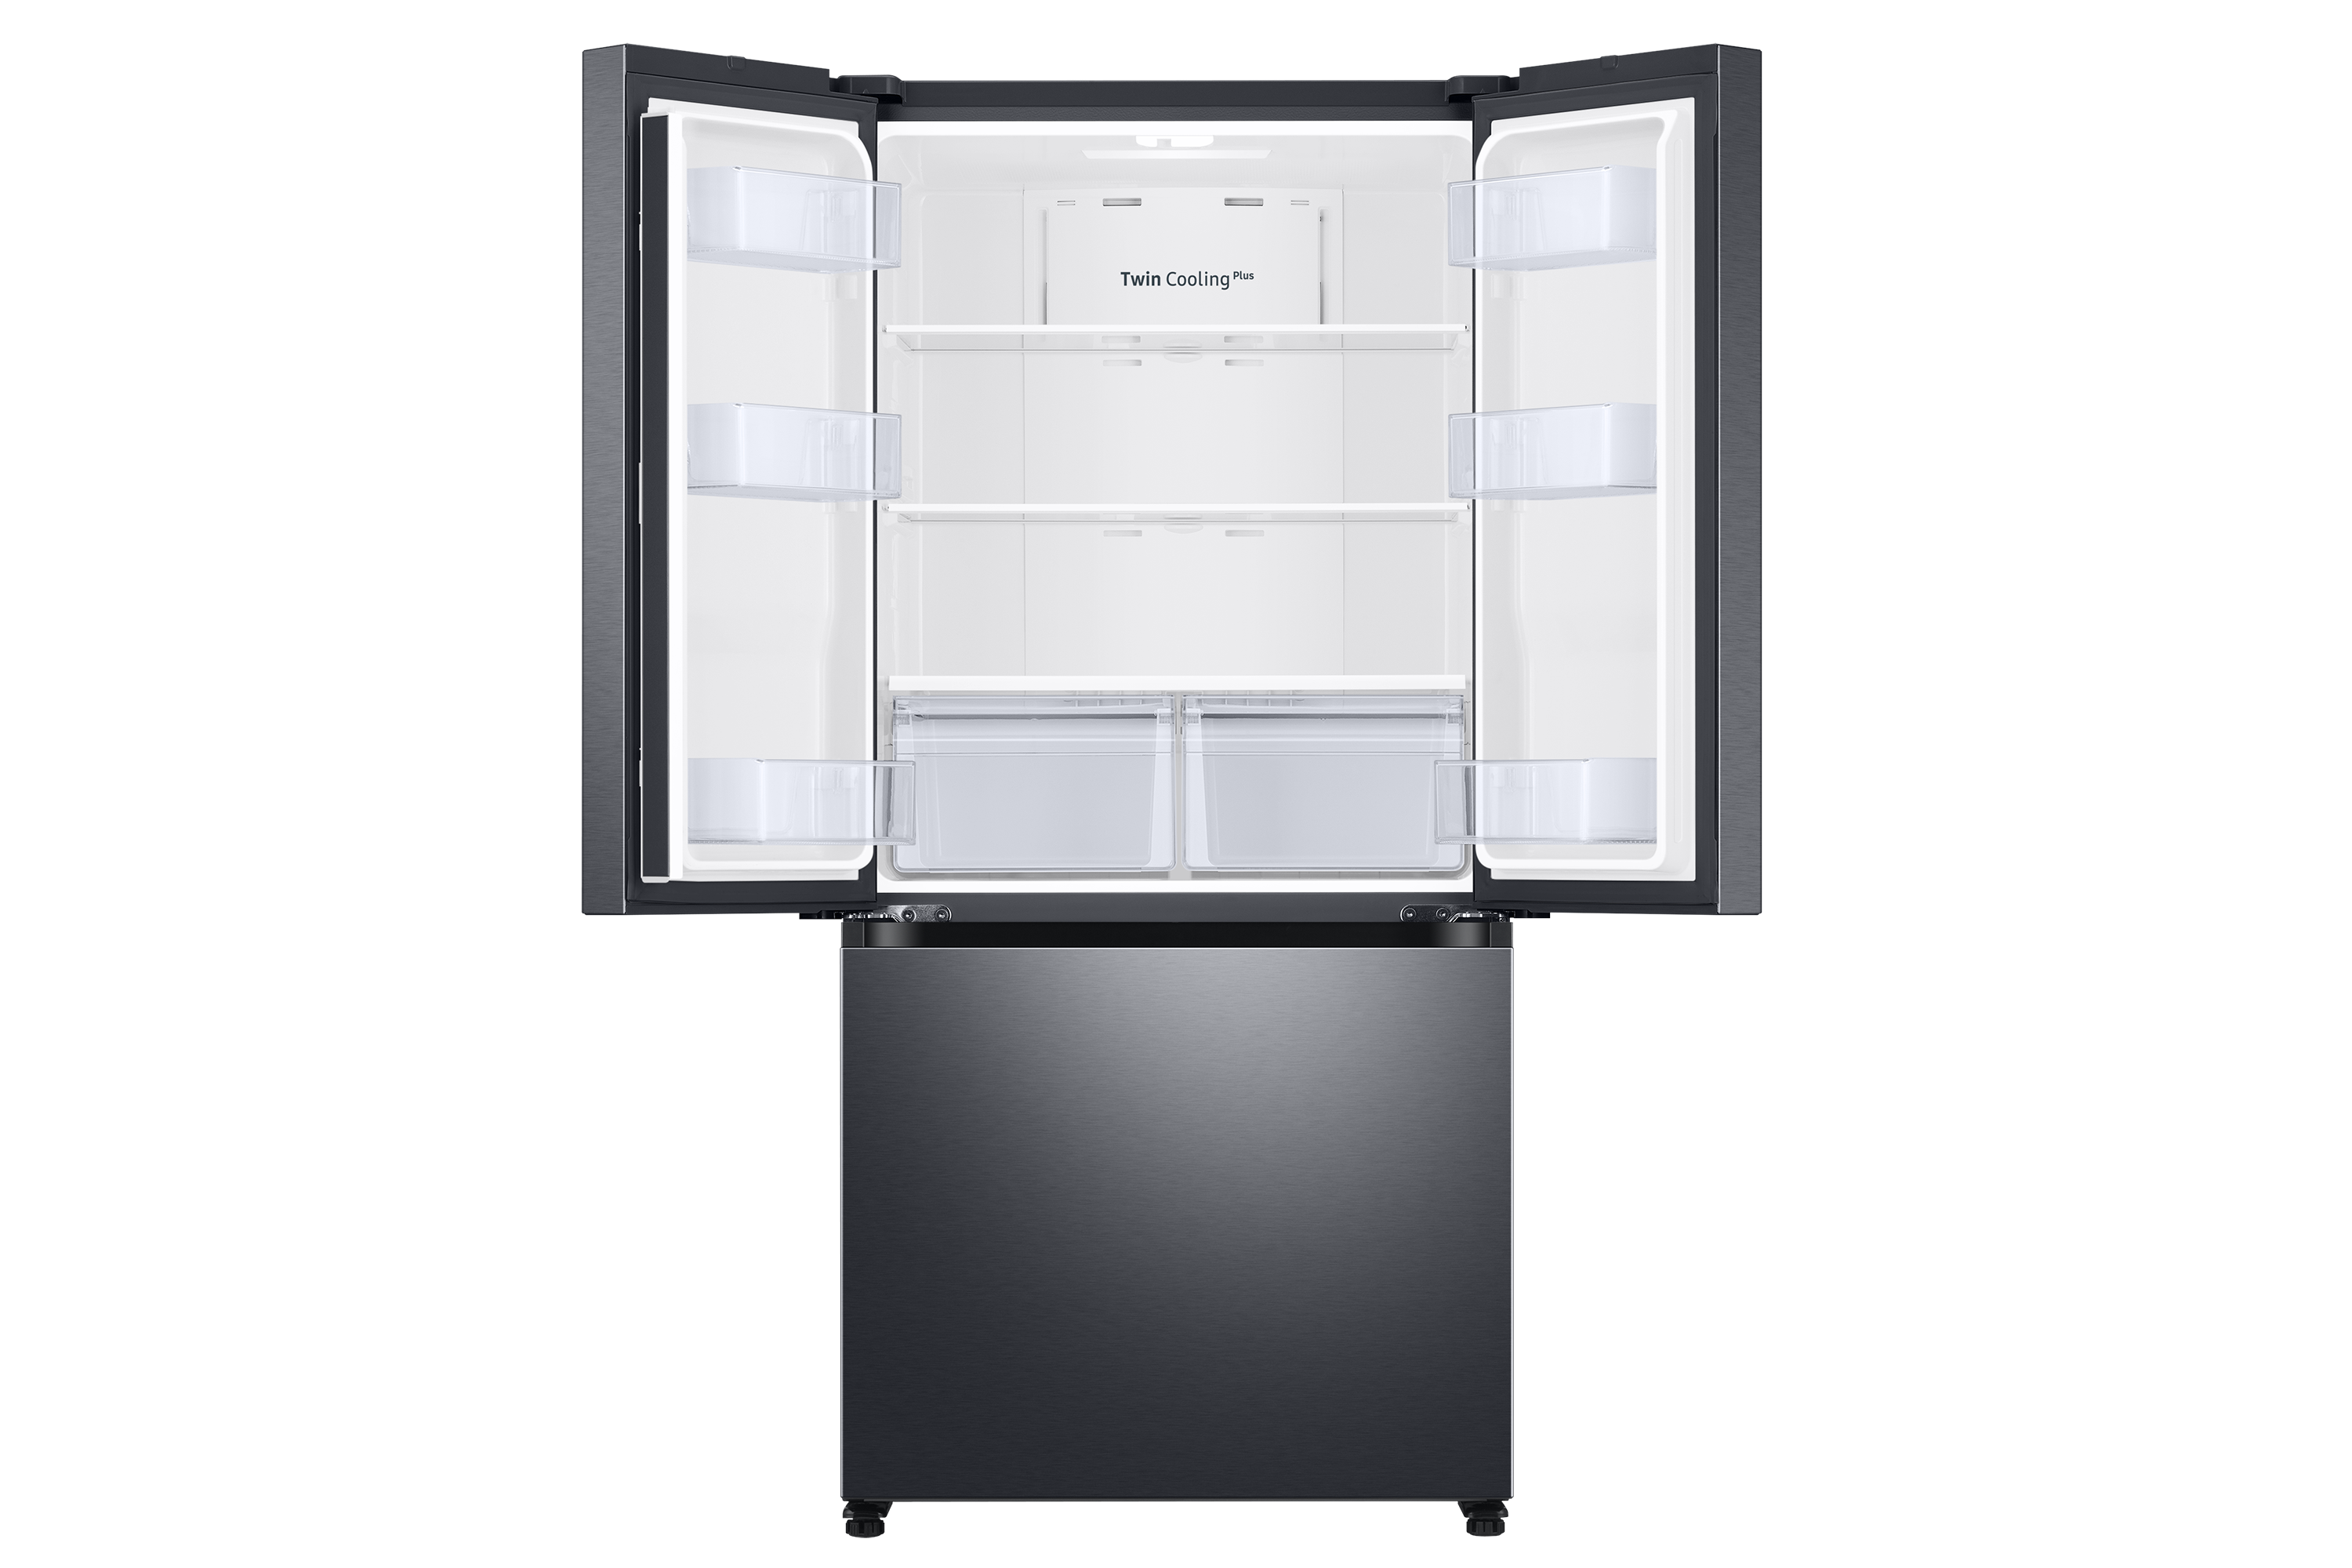 33" Samsung Freestanding French Door Refrigerator With Built- In Look In Fingerprint Resistant Black Stainless Steel - RF18A5101SG